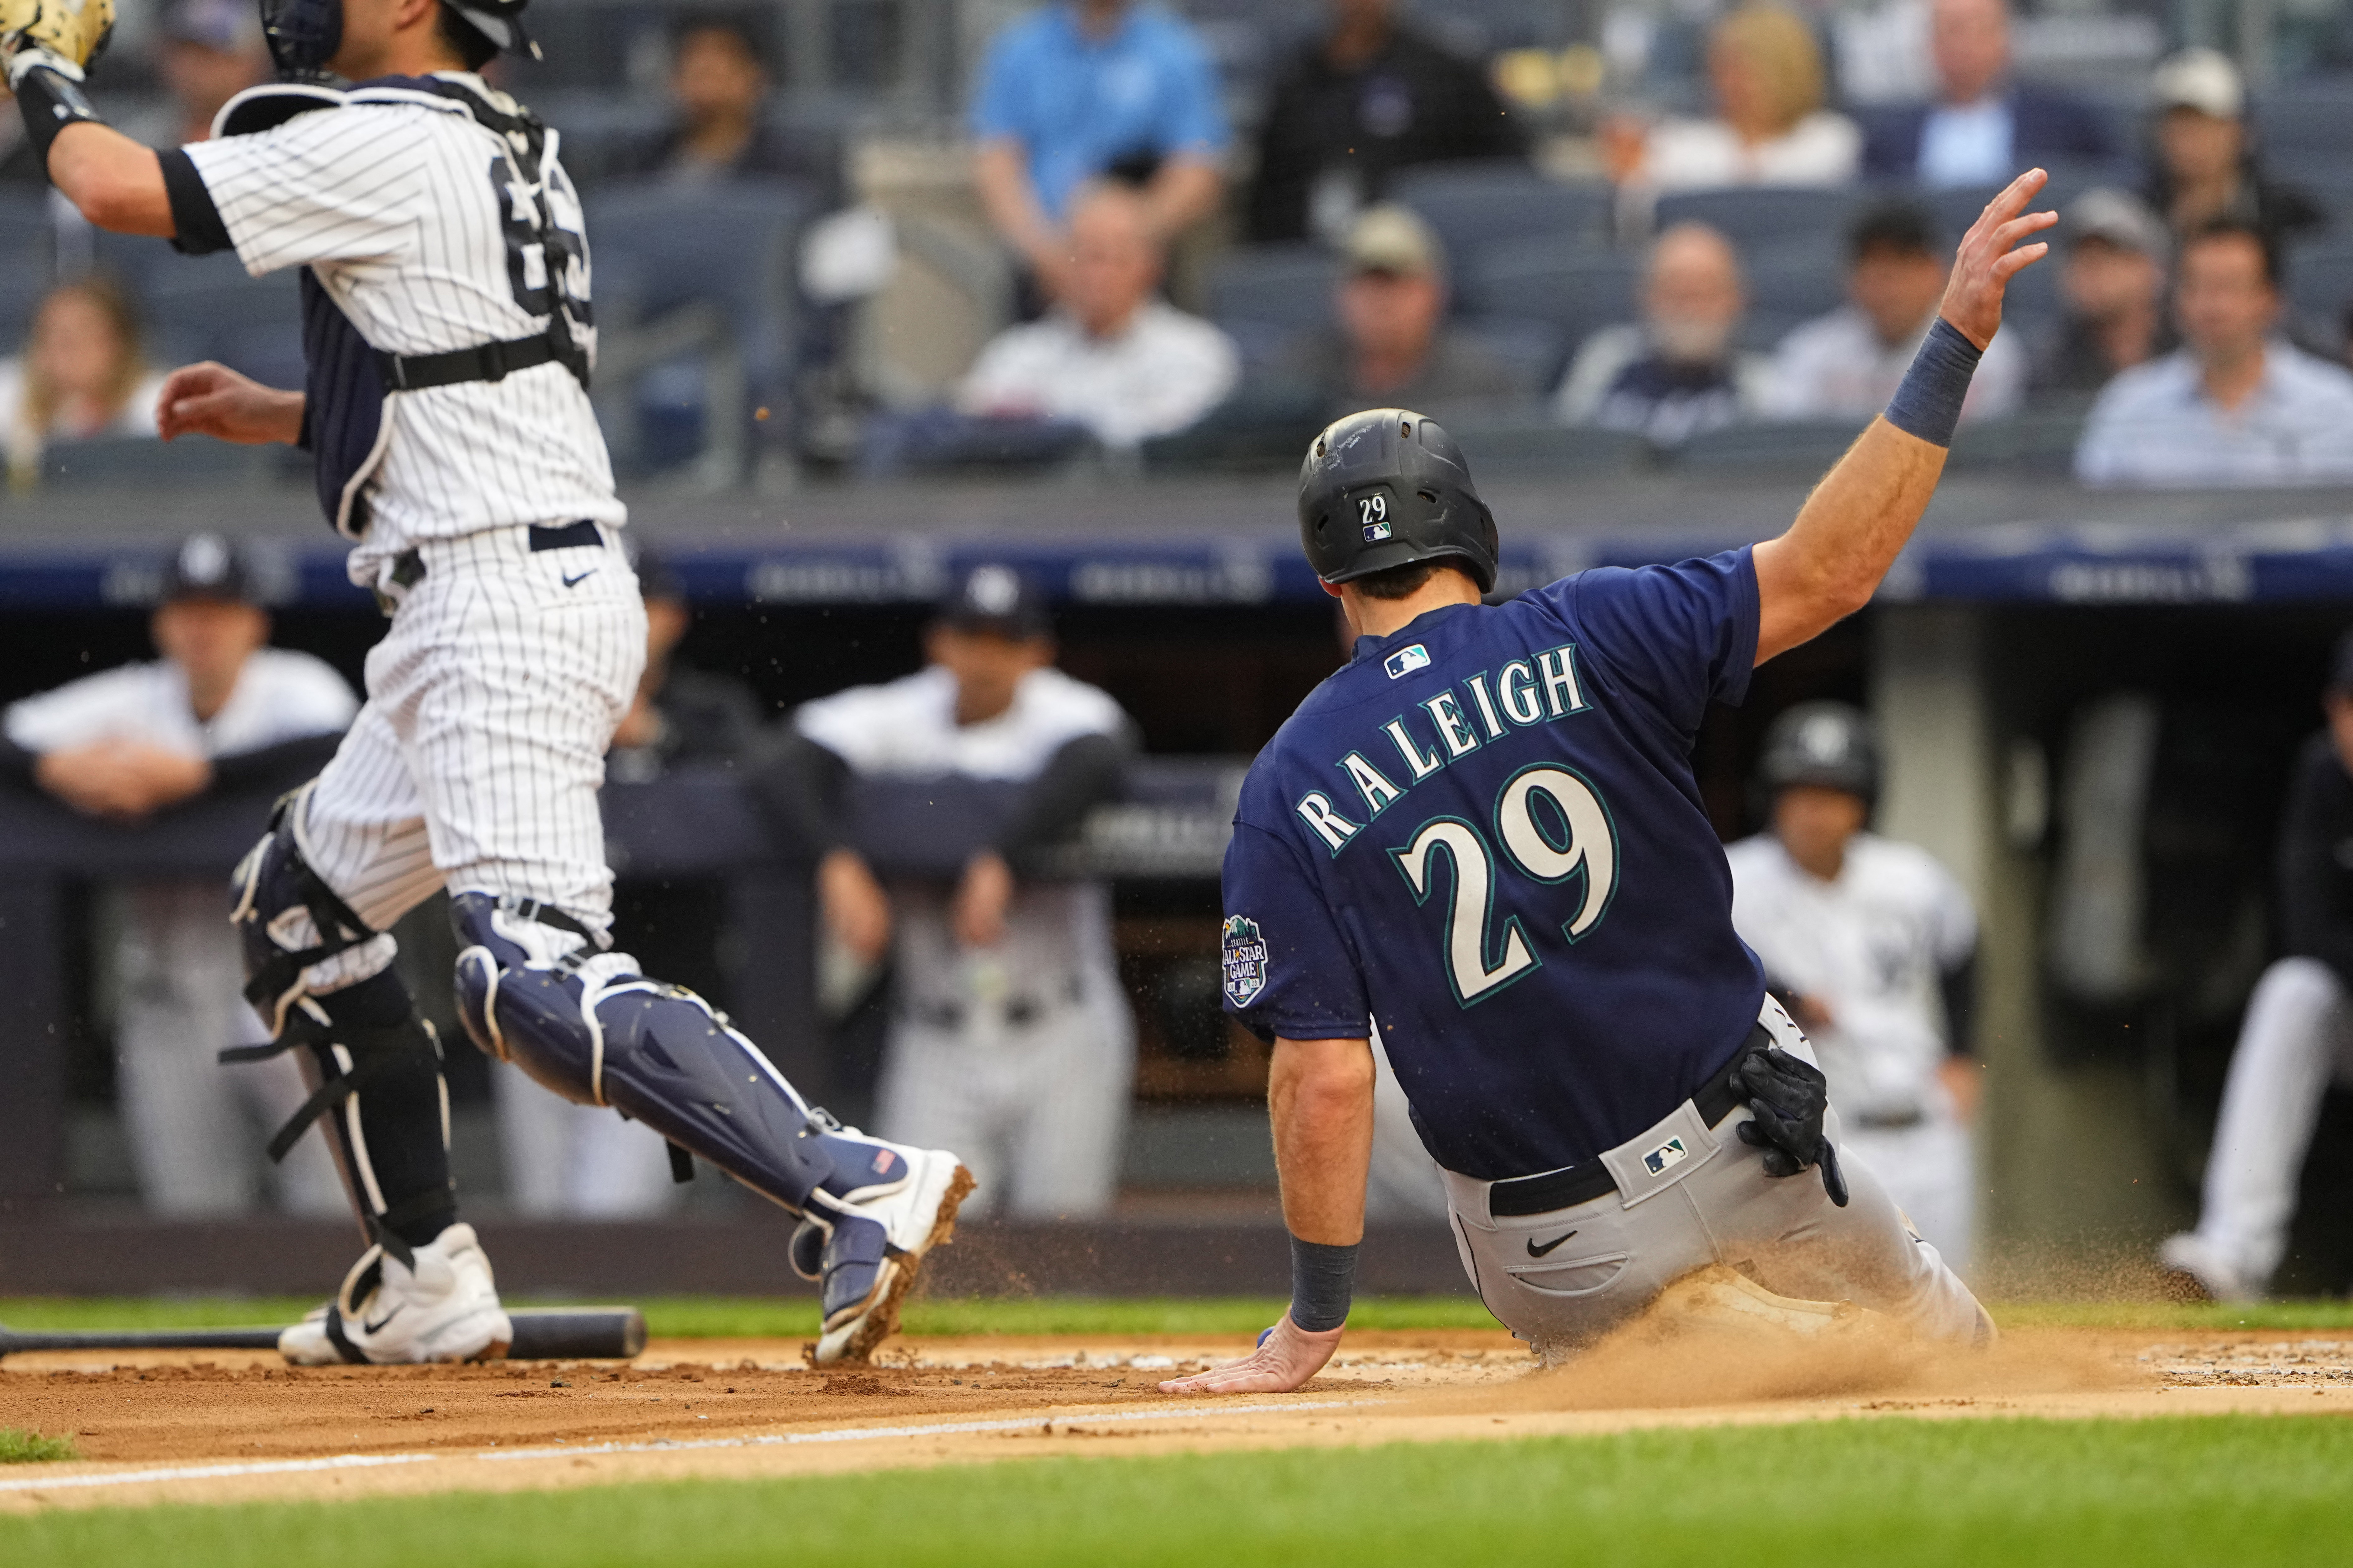 Ex-Mariners help Yankees over sloppy Seattle, Sports